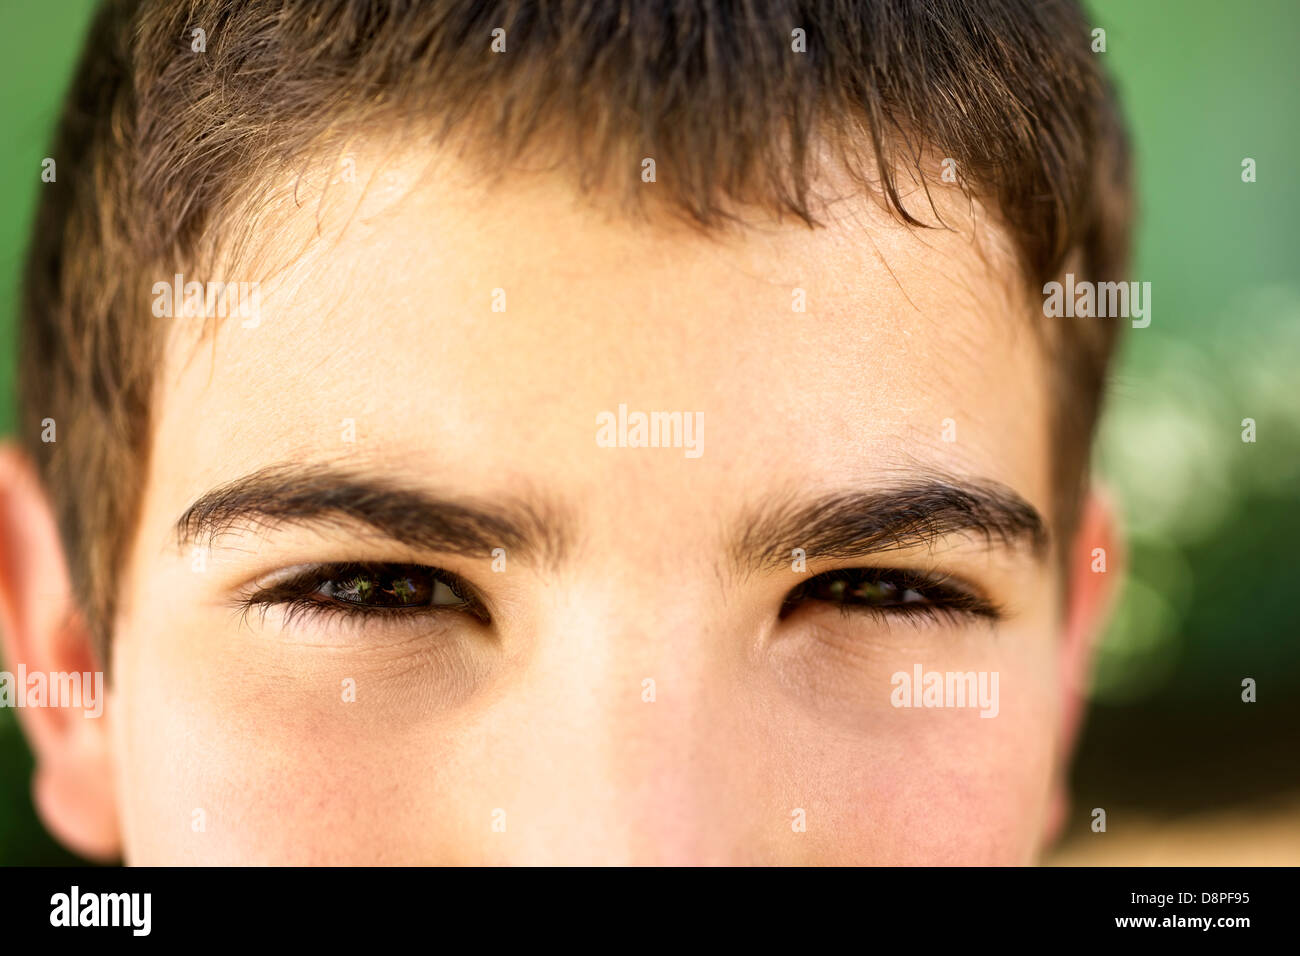 Young people and emotions, portrait of serious kid looking at camera. Closeup of eyes Stock Photo